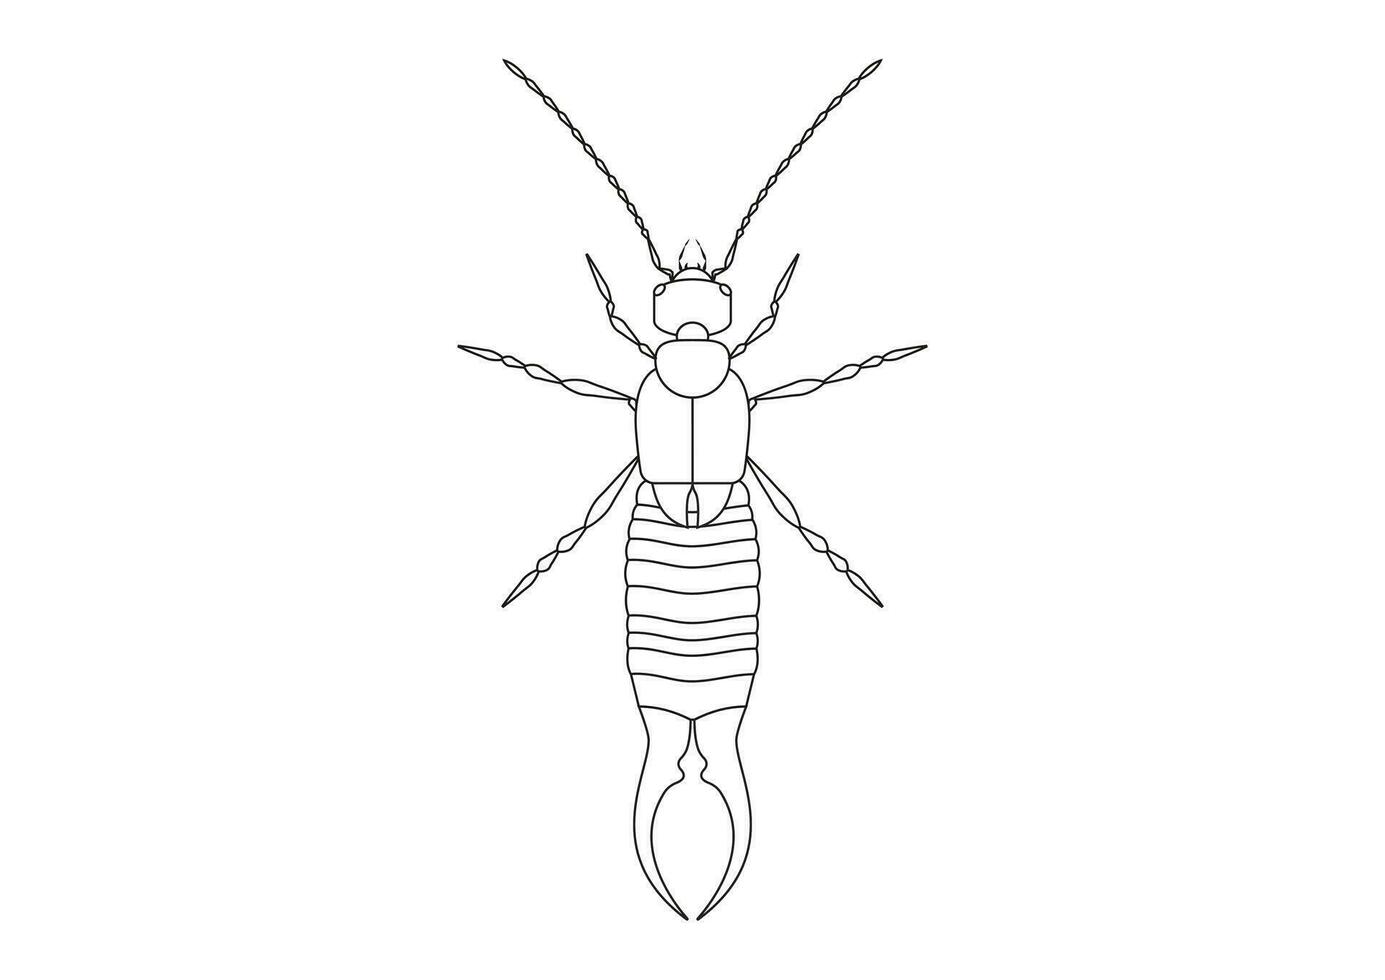 Black and White Earwig Clipart Vector isolated on White Background. Coloring Page of a Earwig